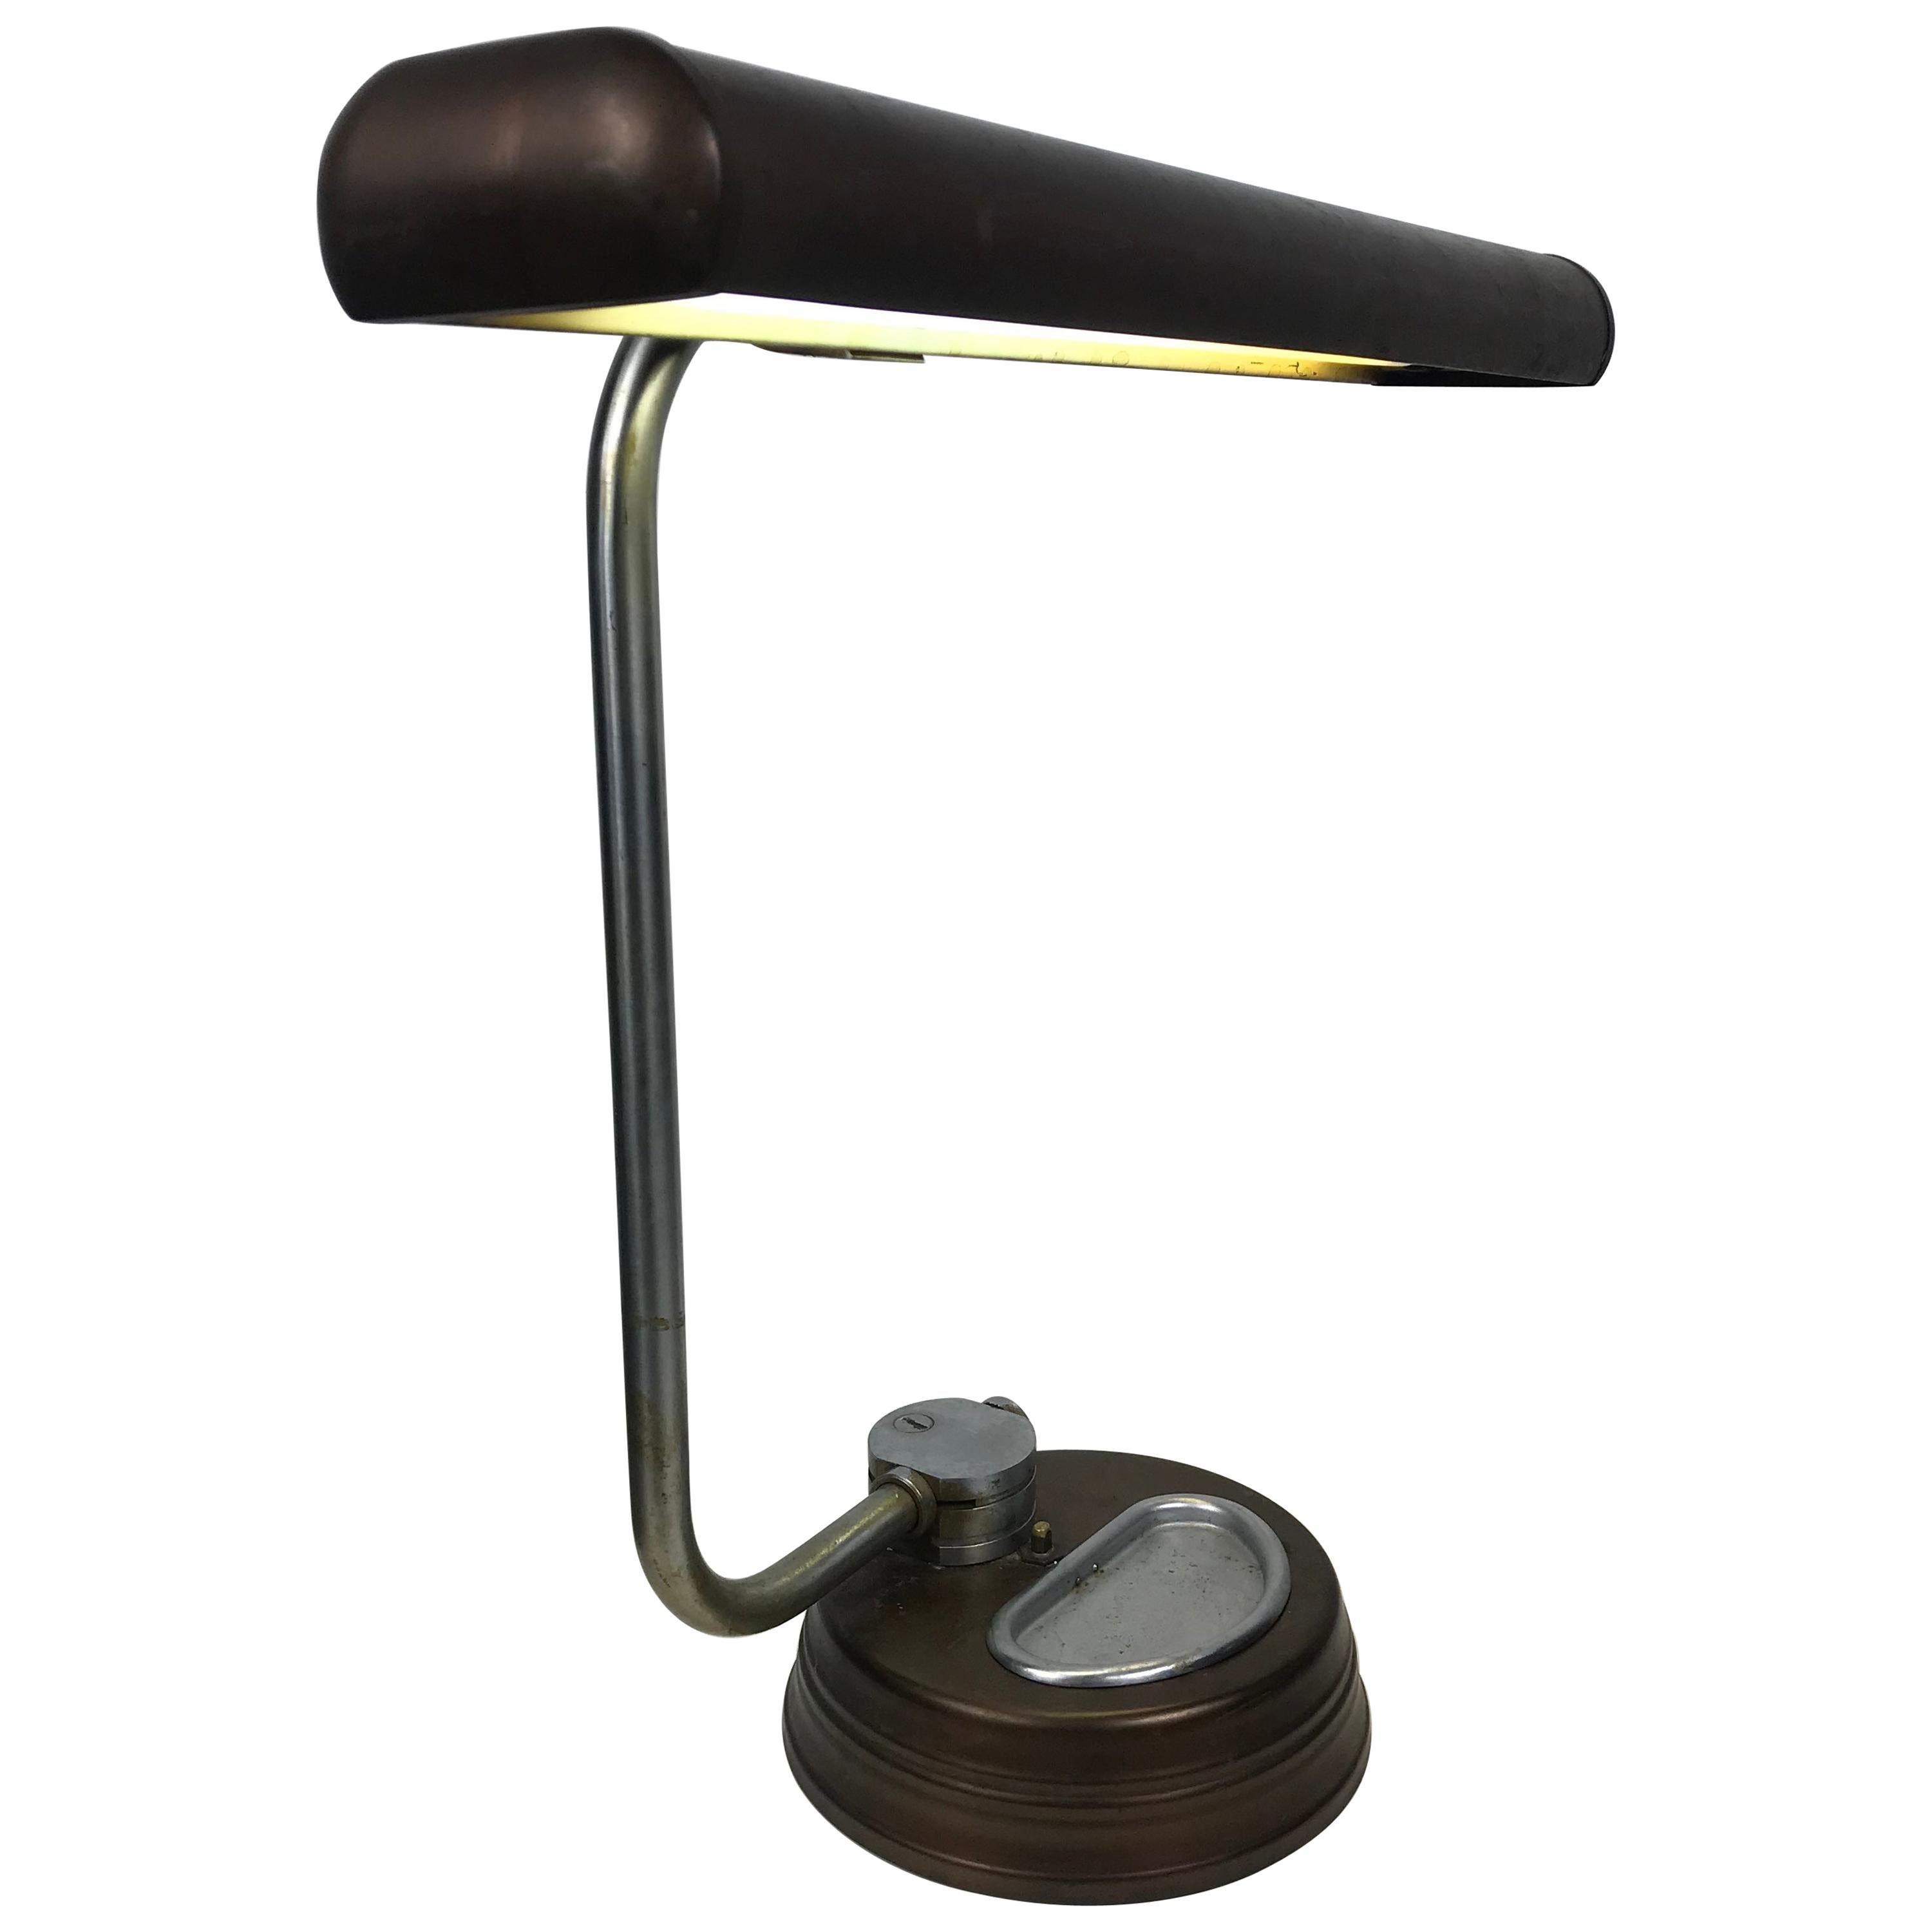 Modernist, Machine Age Stainless Steel / Metal Industrial Desk Lamp, Art Deco For Sale